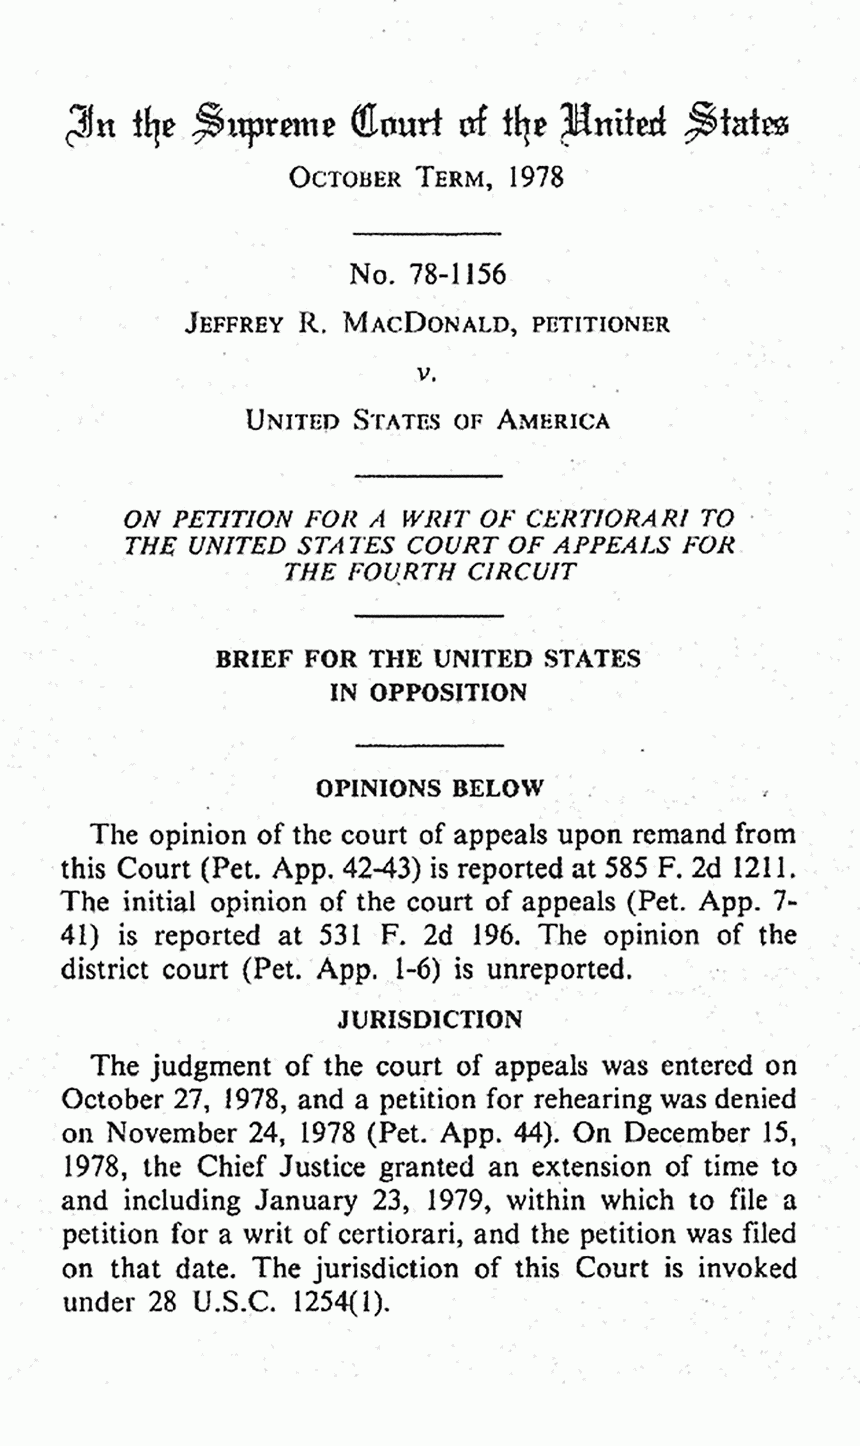 February 1979: Supreme Court of the United States, On Petition for Writ of Certiorari to the U. S. Court of Appeals for the 4th Circuit: Brief for the United States in Opposition, p. 1 of 9